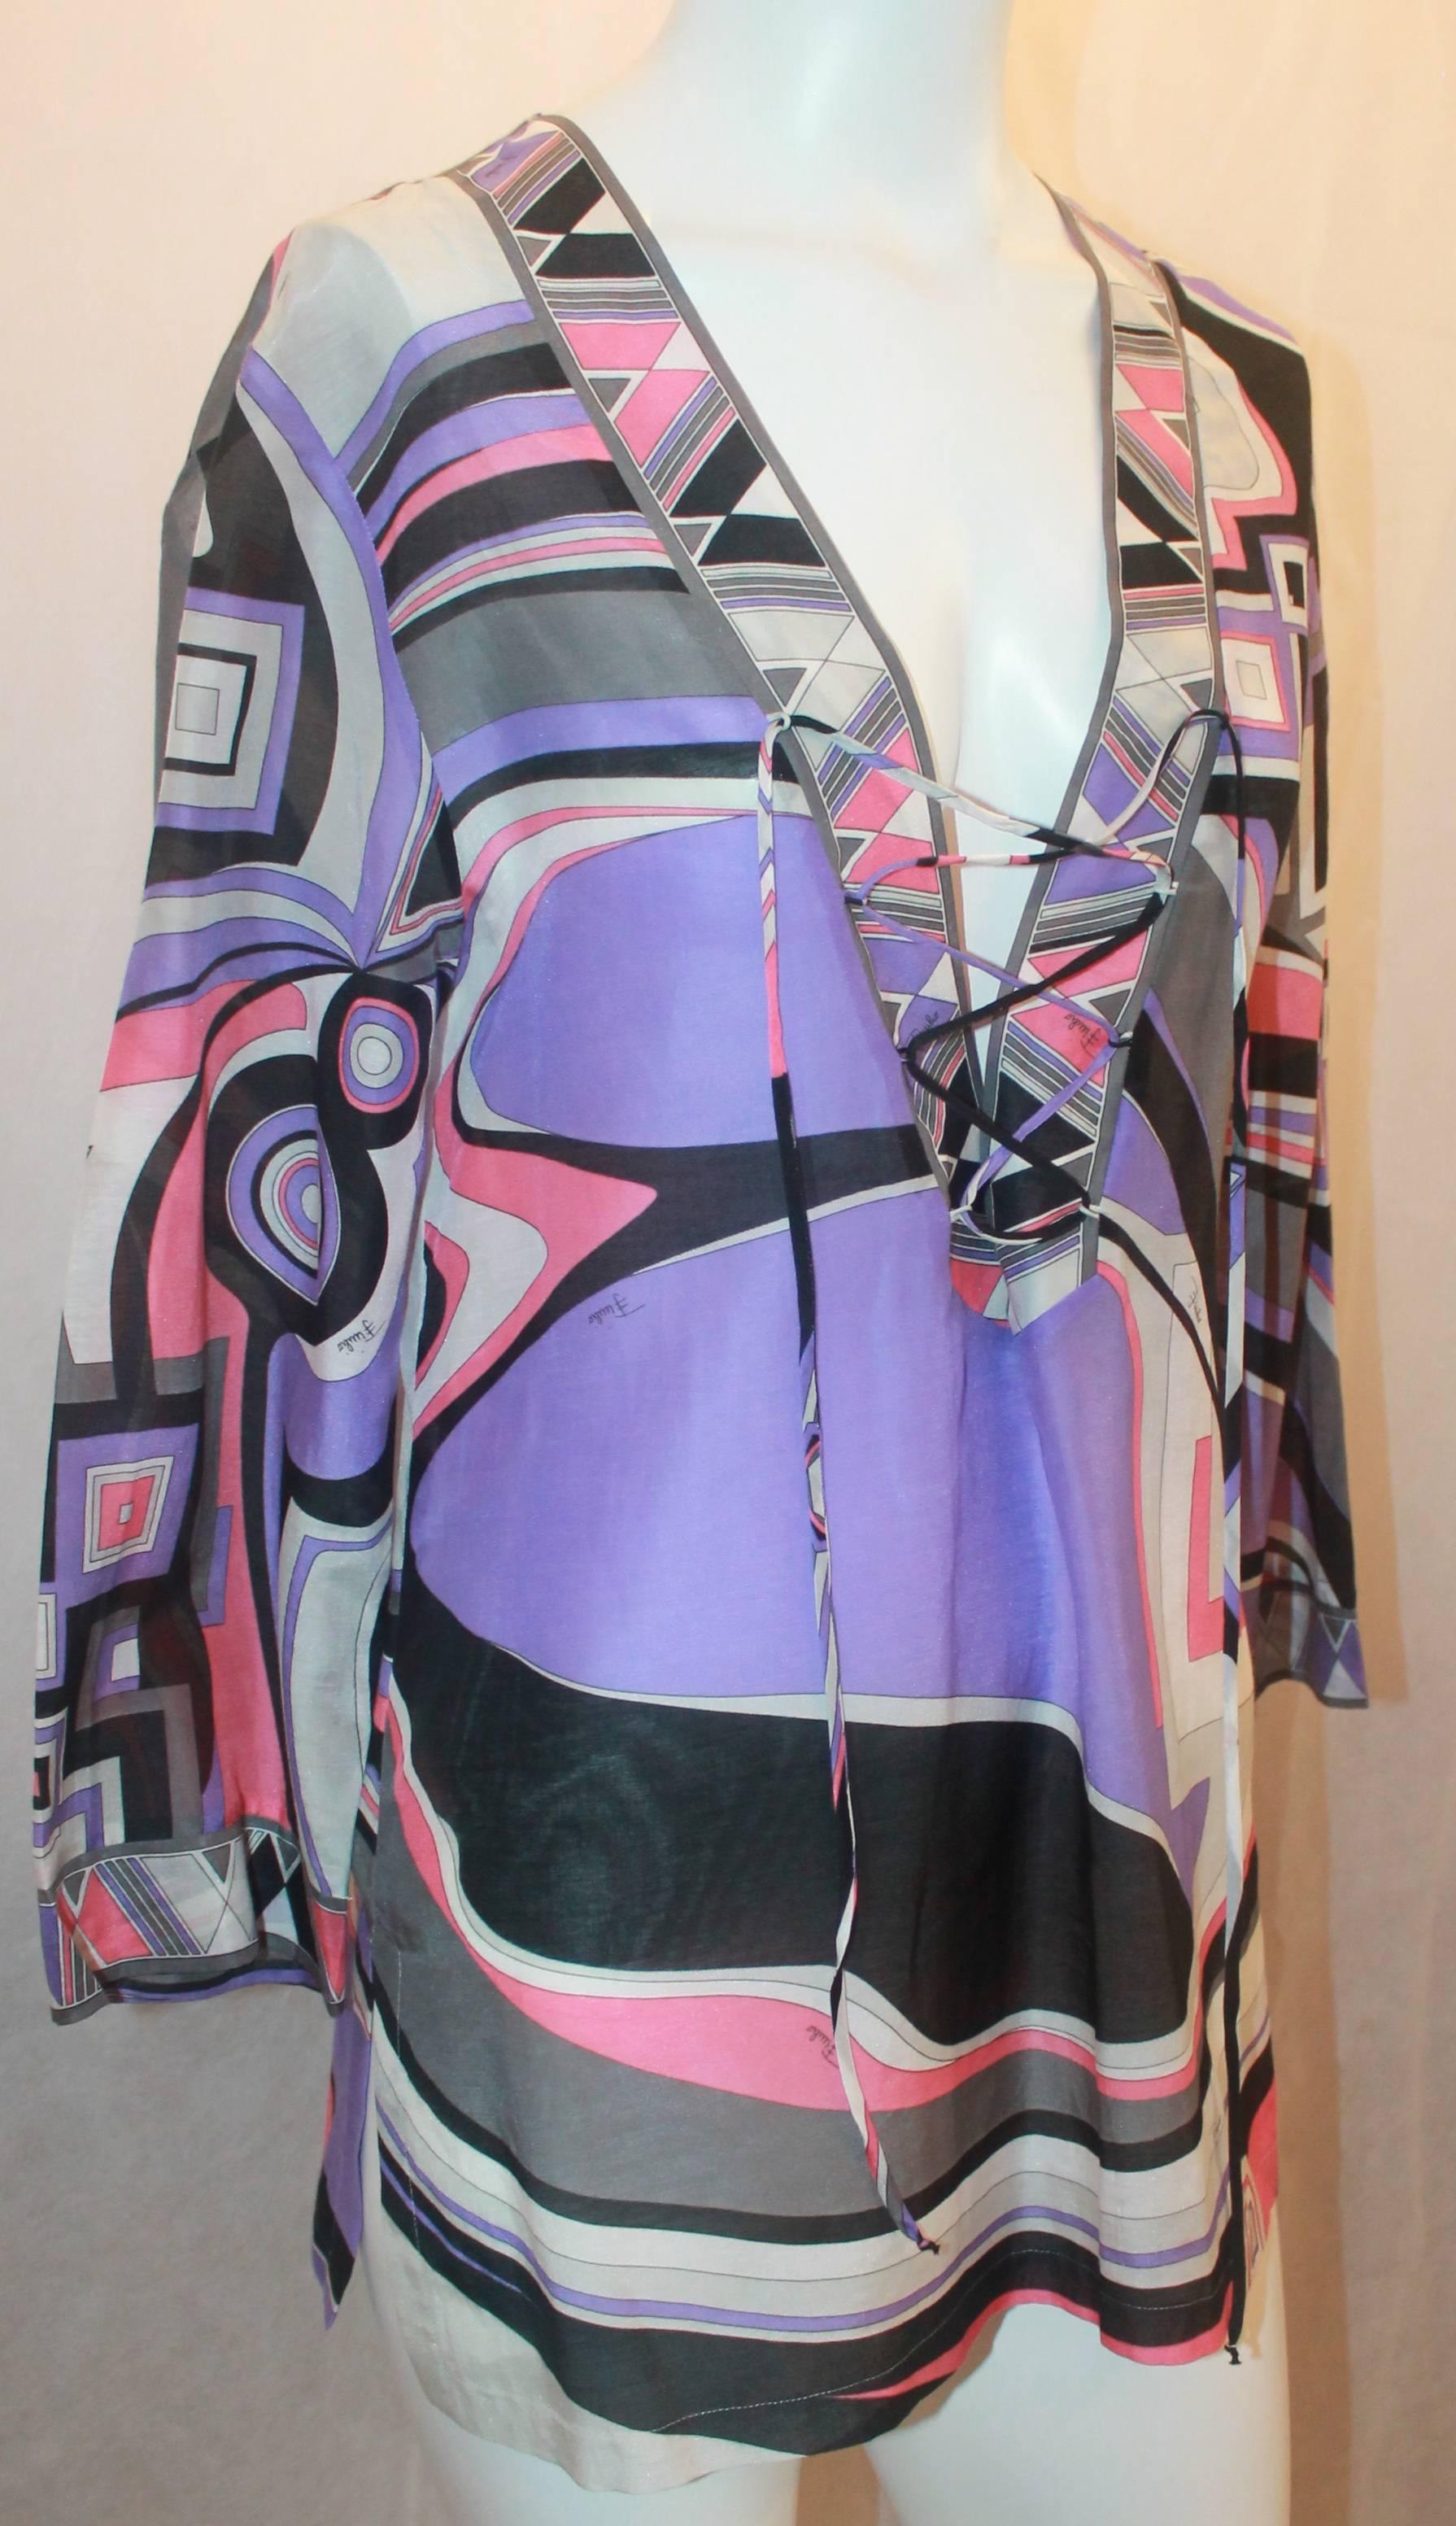 Emilio Pucci Purple & Pink Printed Tunic Top w/ Front Tie - 8. This top is in excellent condition and is perfect for the summer. The print is geometric and the tunic features a front tie. 

Measurements:
Bust- 36